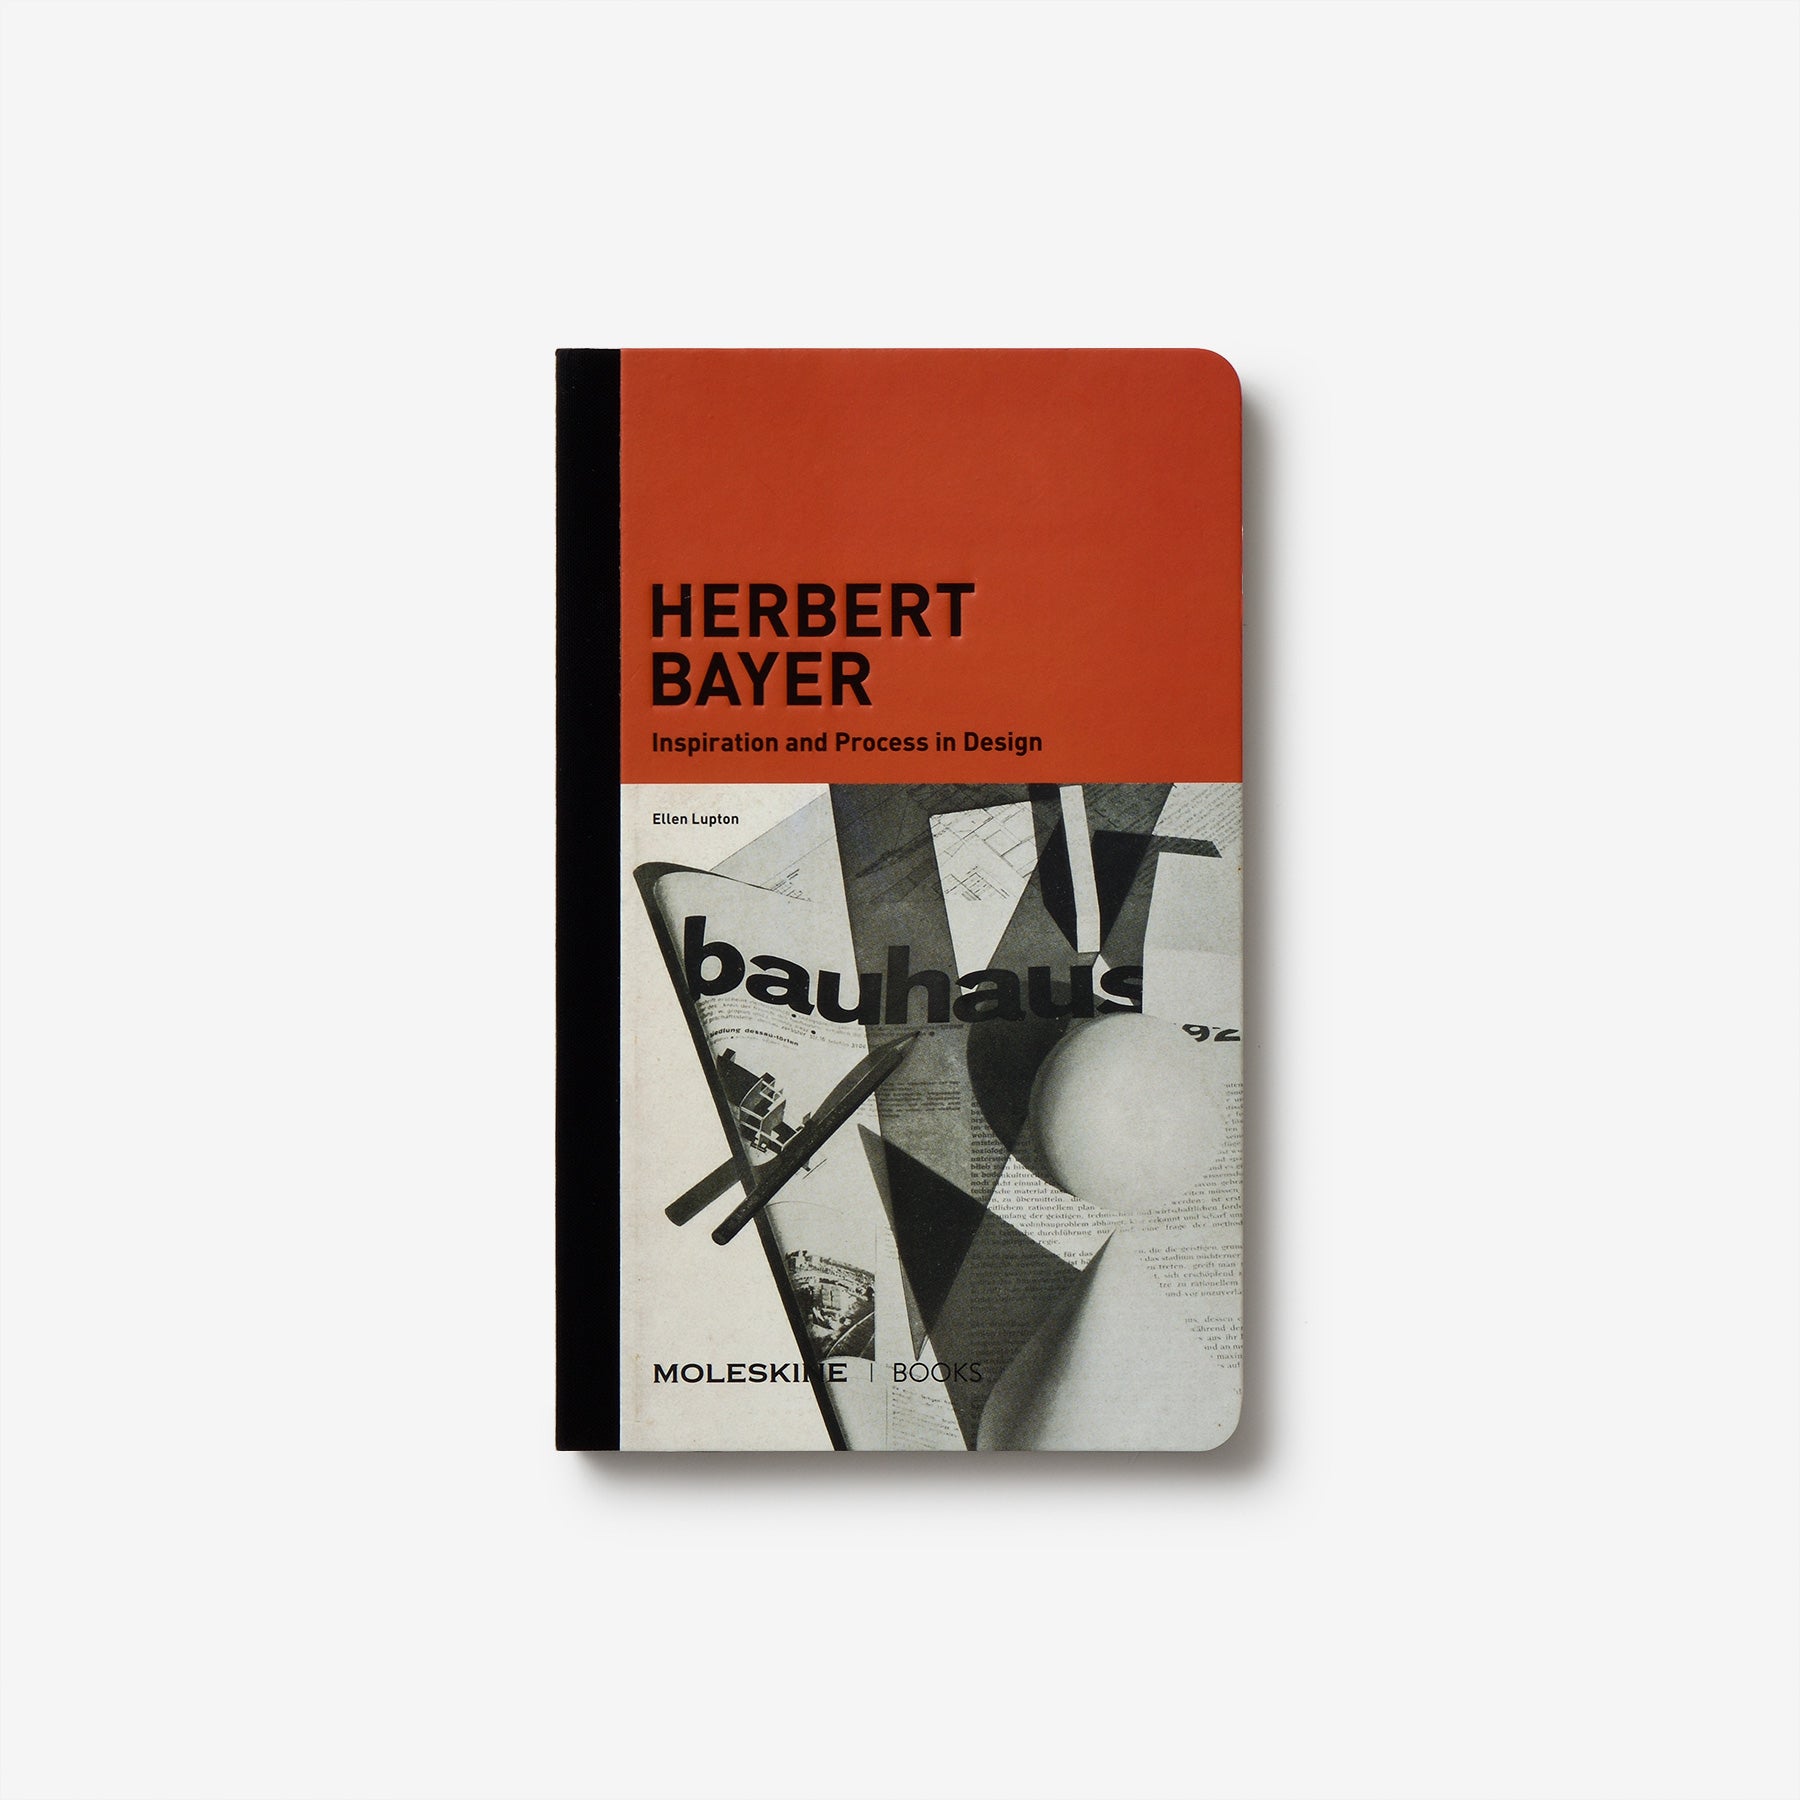 Herbert Bayer: Inspiration and Process in Design